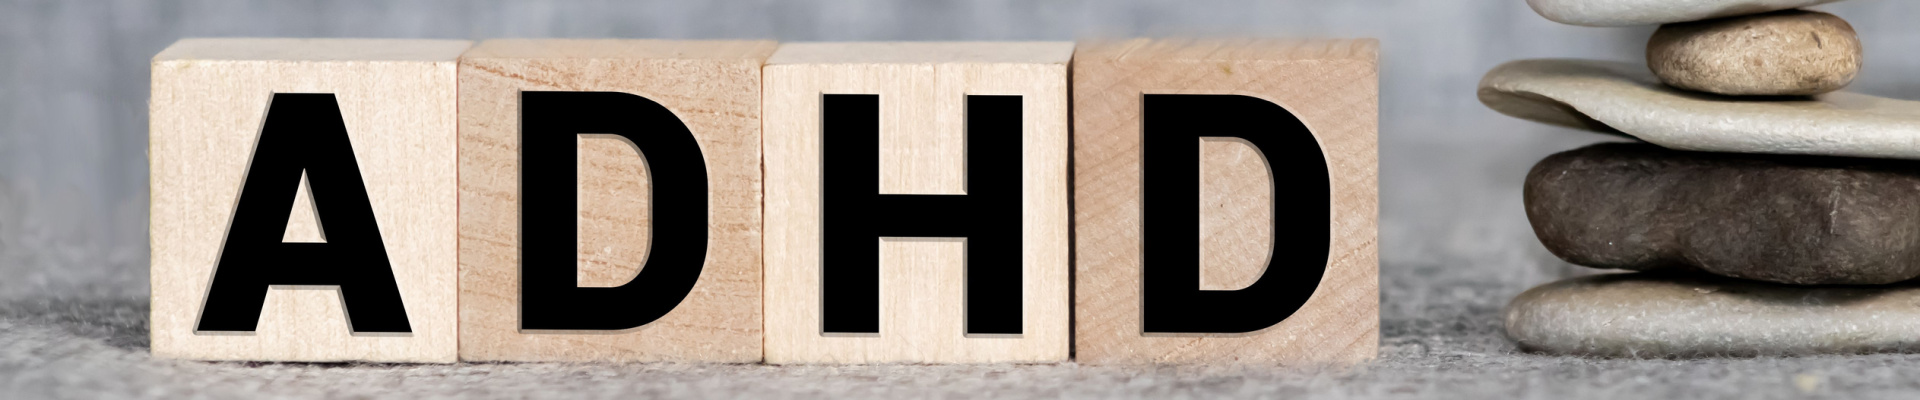 ADHD abbreviation on wooden blocks. ADHD is Attention deficit hyperactivity disorder. Close up. Vignette.